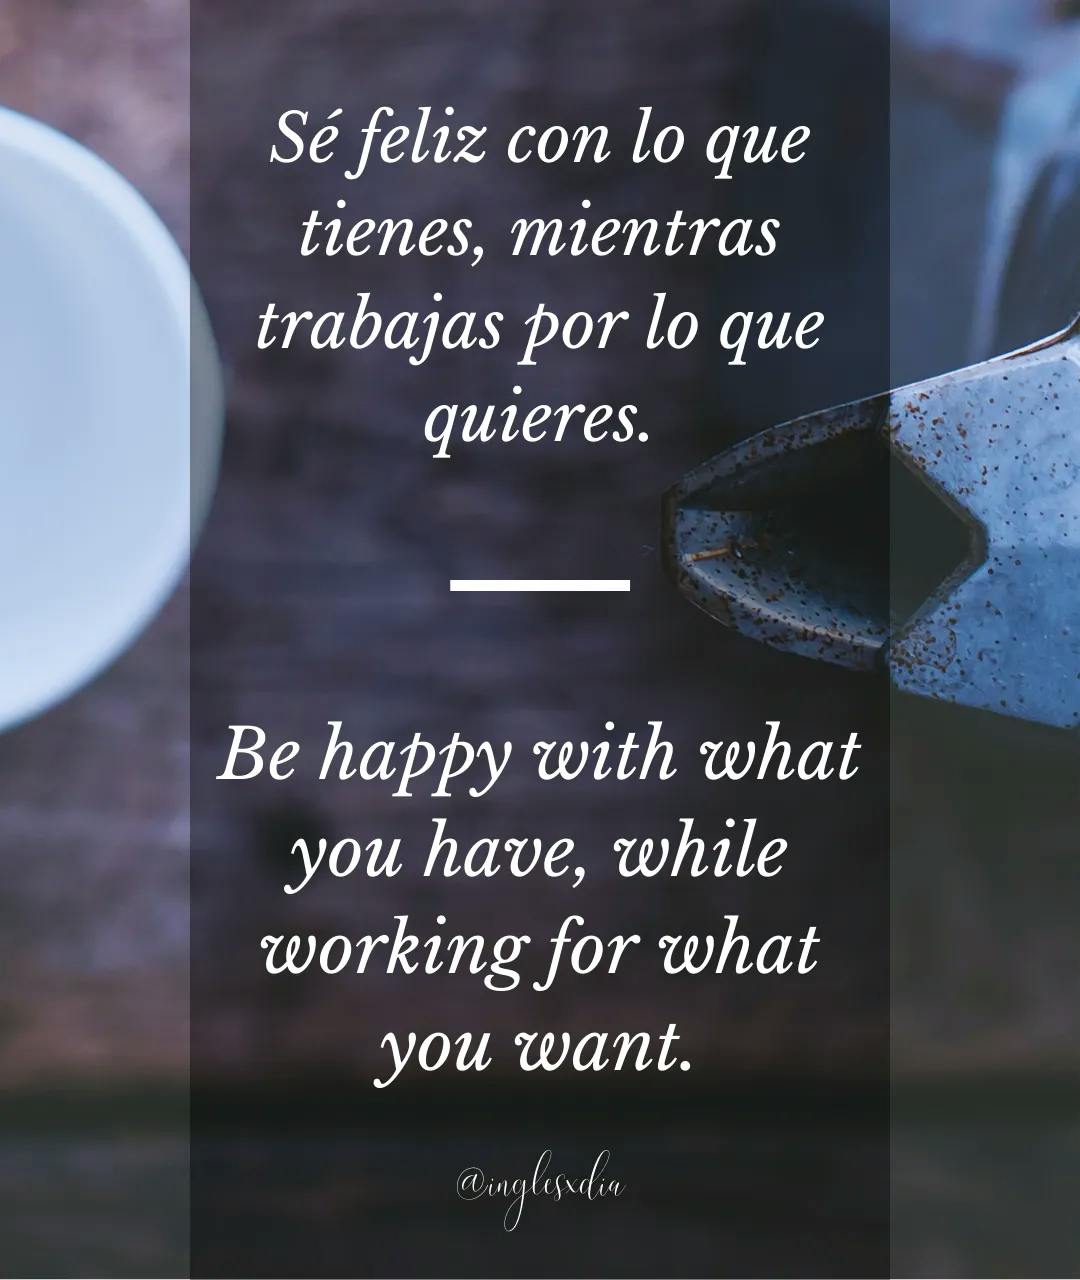 Frases motivadoras en inglés: Be happy with what you have, while working for what you want.